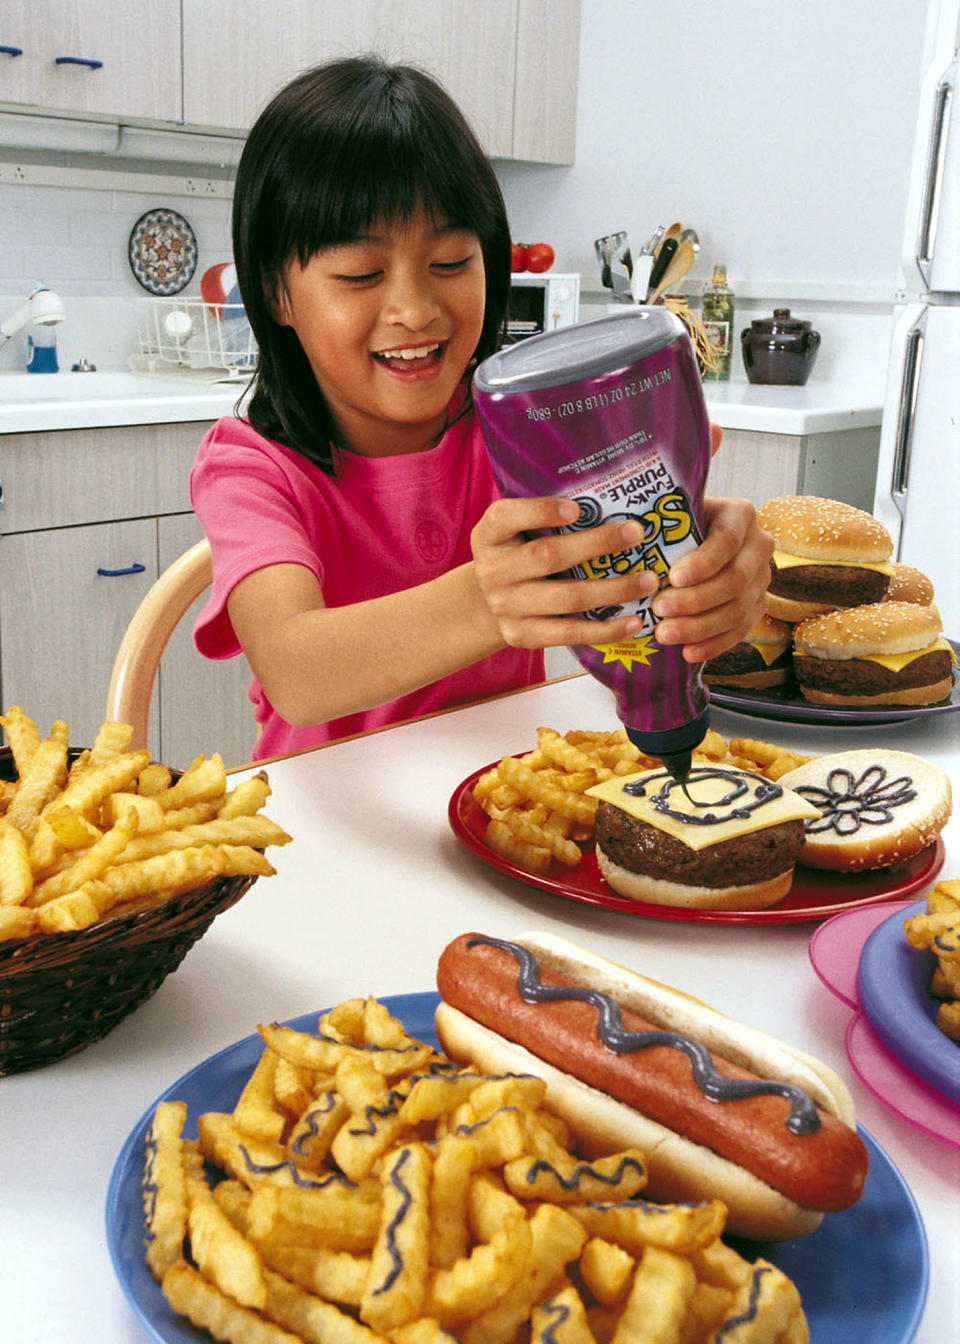 This undated photo shows a girl using Heinz''s new "Funky Purple" ketchup bottle